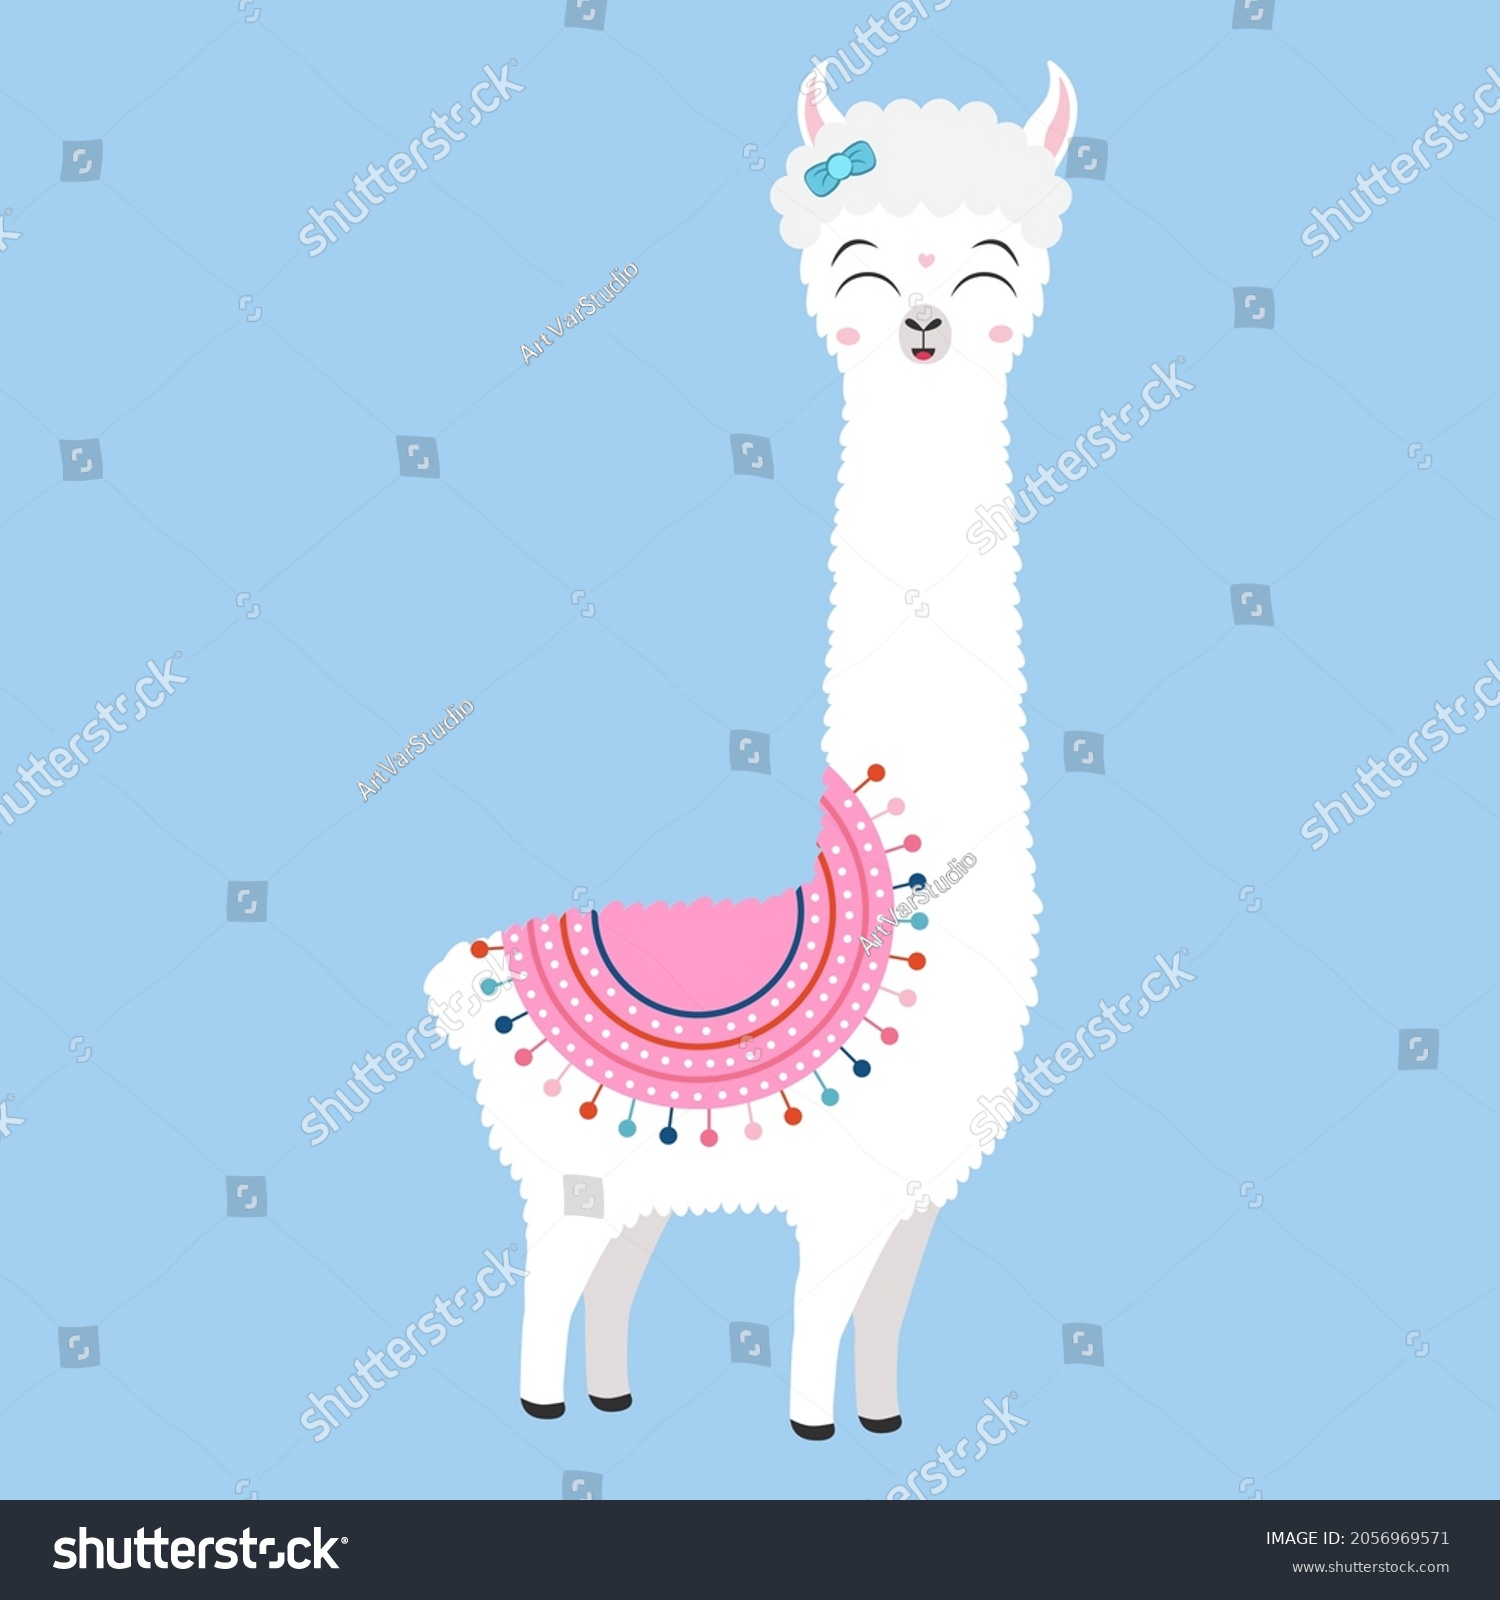 SVG of Each of the llamas is saved in a separate file for ease of use. Files in which alpaca llamas are saved. Cartoon Llama Illustration, Vector Kawaii Llama. svg